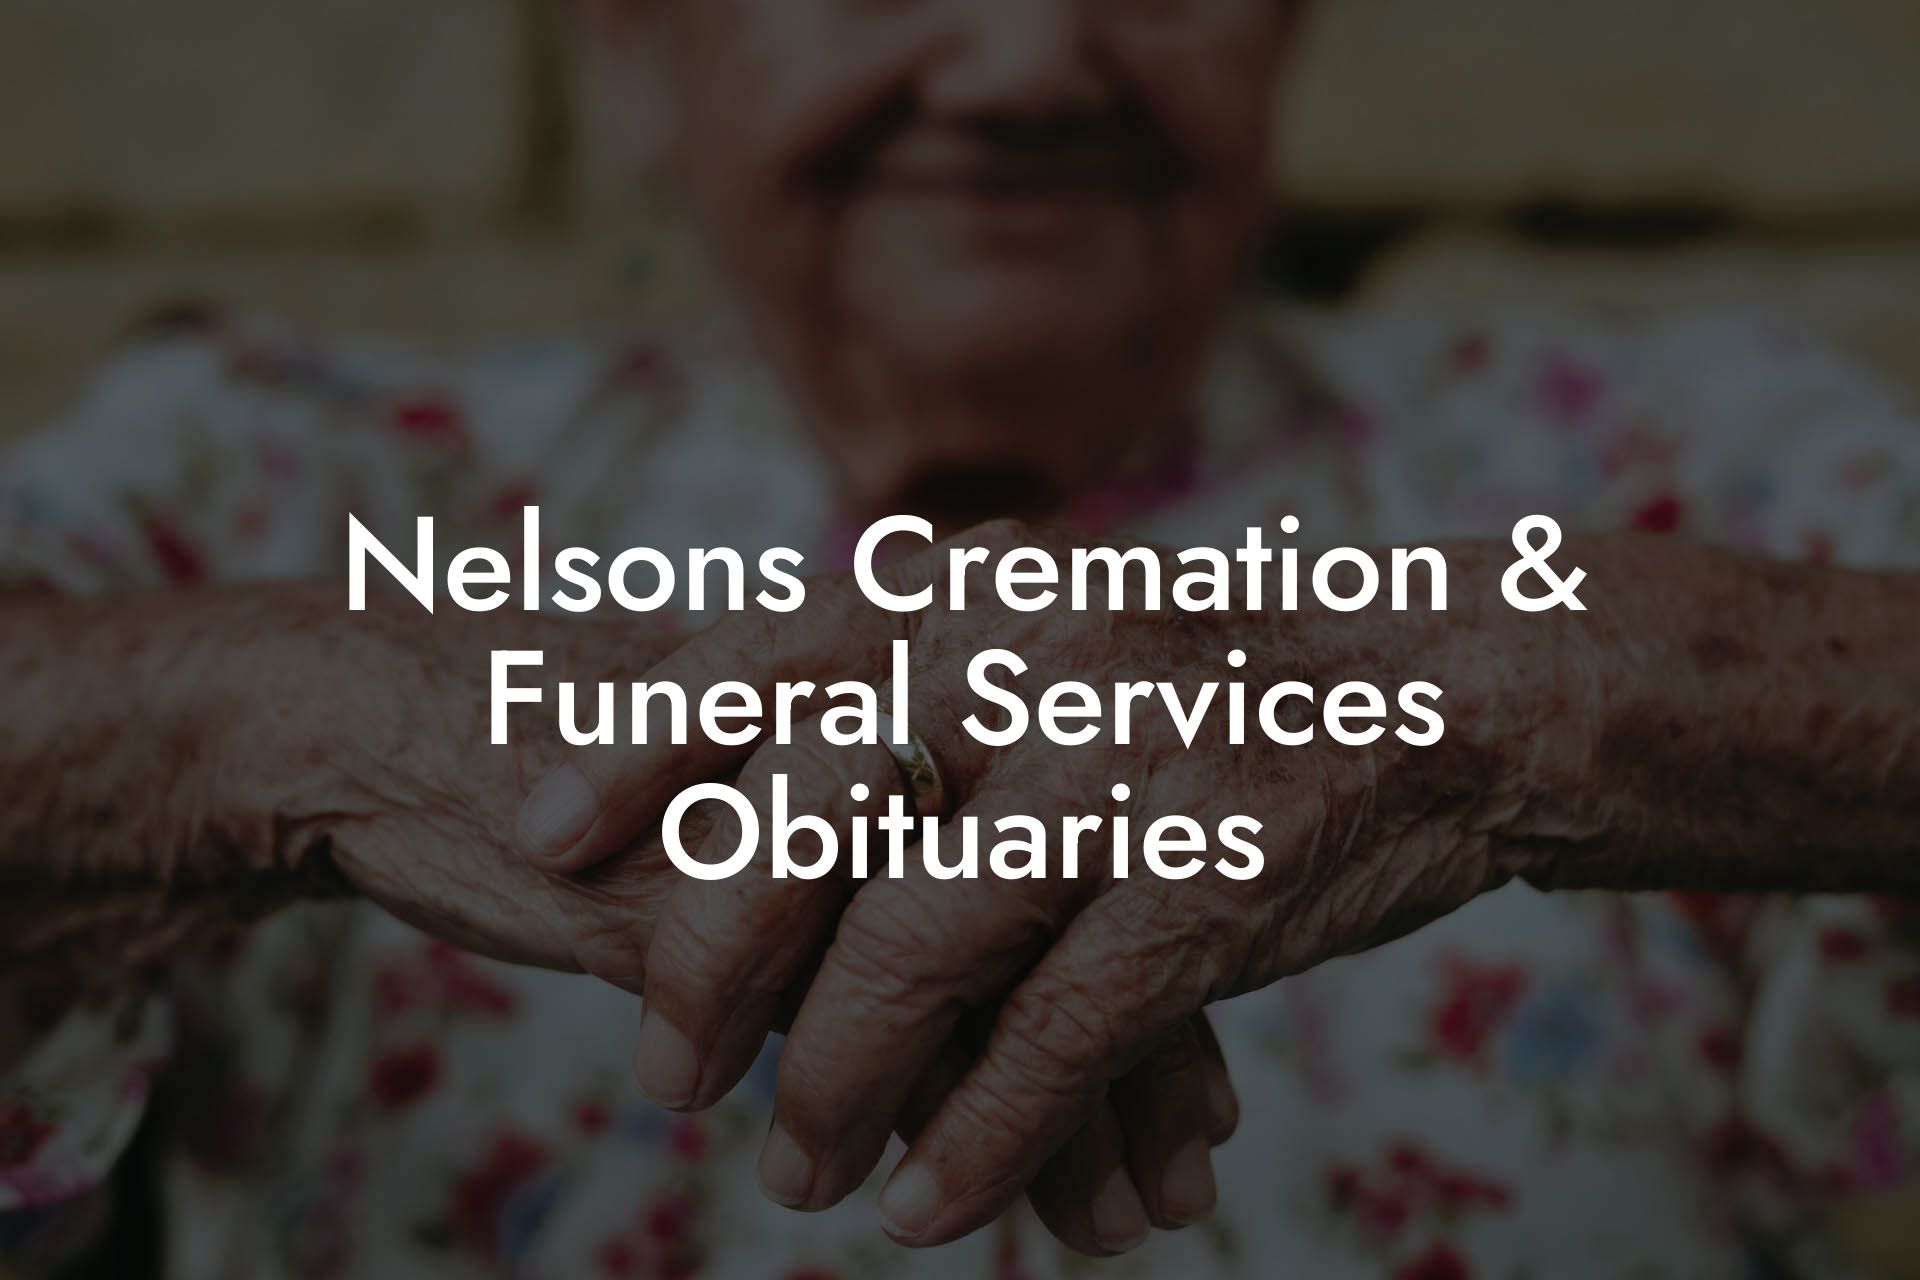 Nelsons Cremation & Funeral Services Obituaries